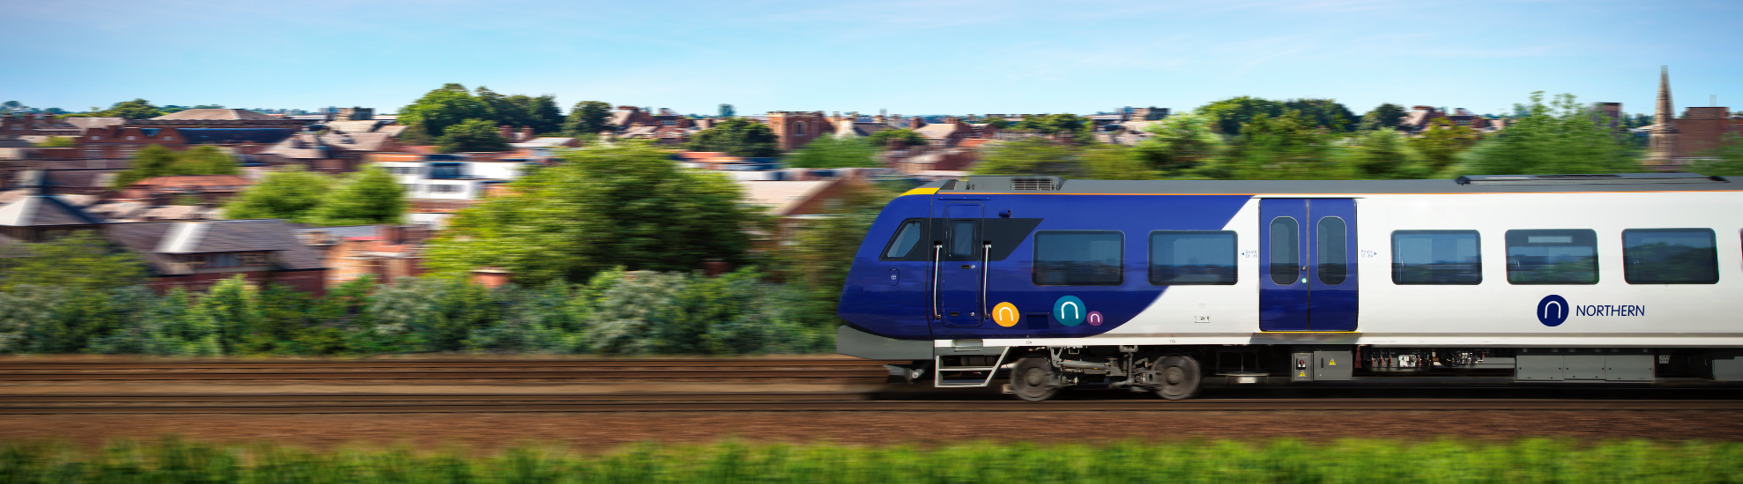 How Fast do Northern Trains Go?